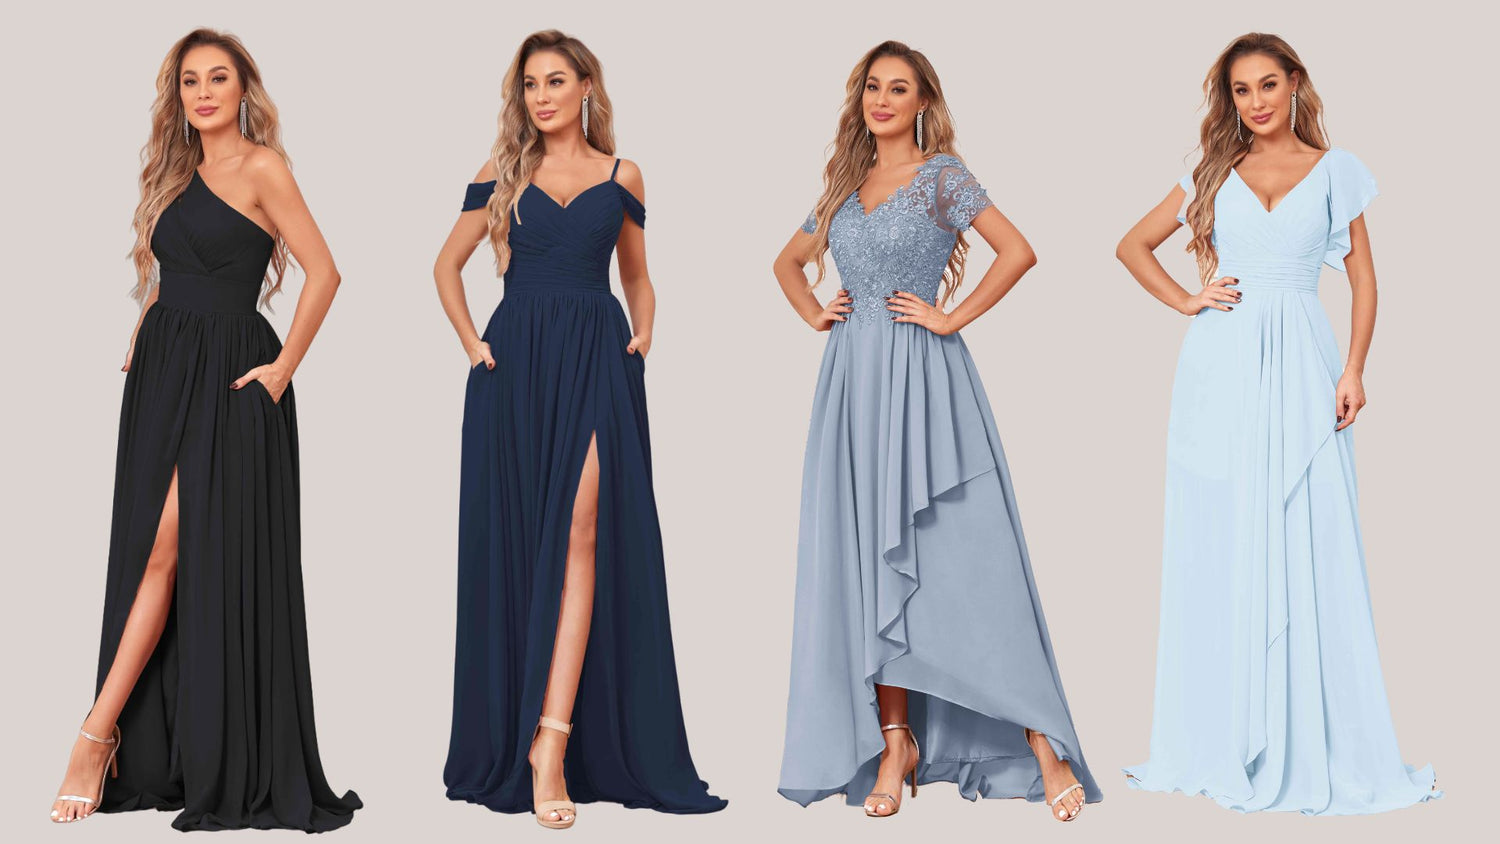 10 Must-Have Blue and Black Bridesmaid Dresses